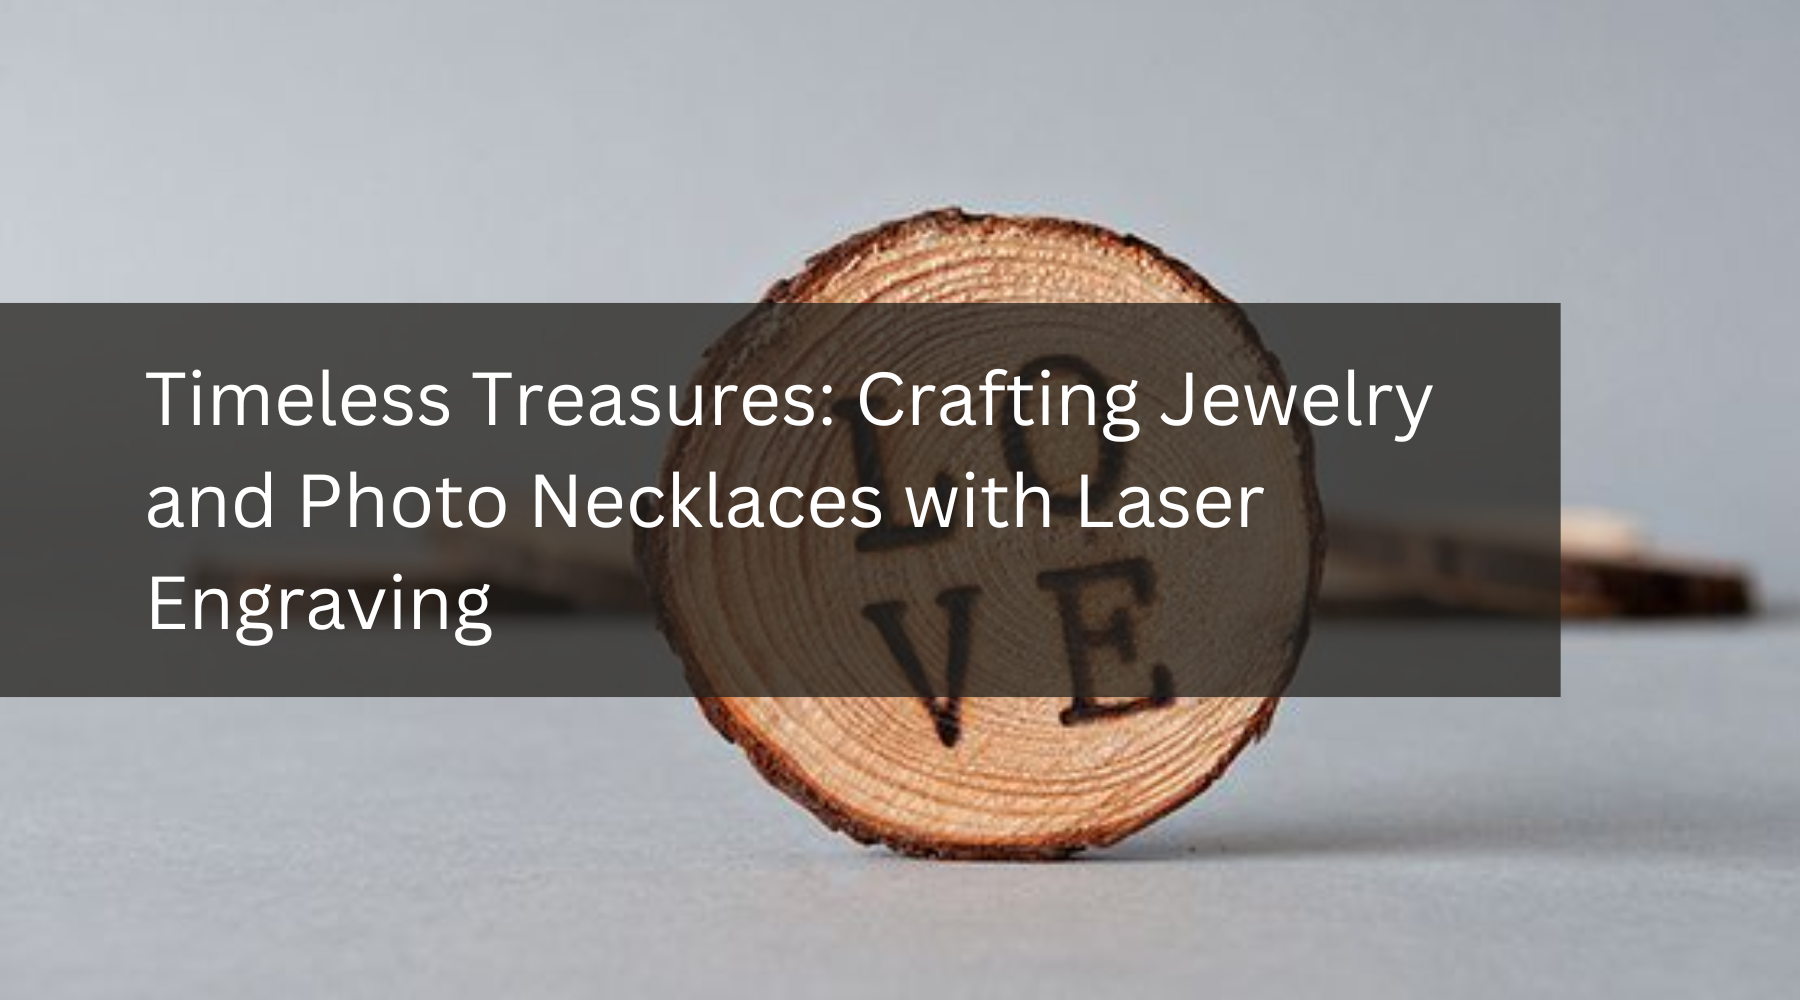 Timeless Treasures: Crafting Jewelry and Photo Necklaces with Laser Engraving